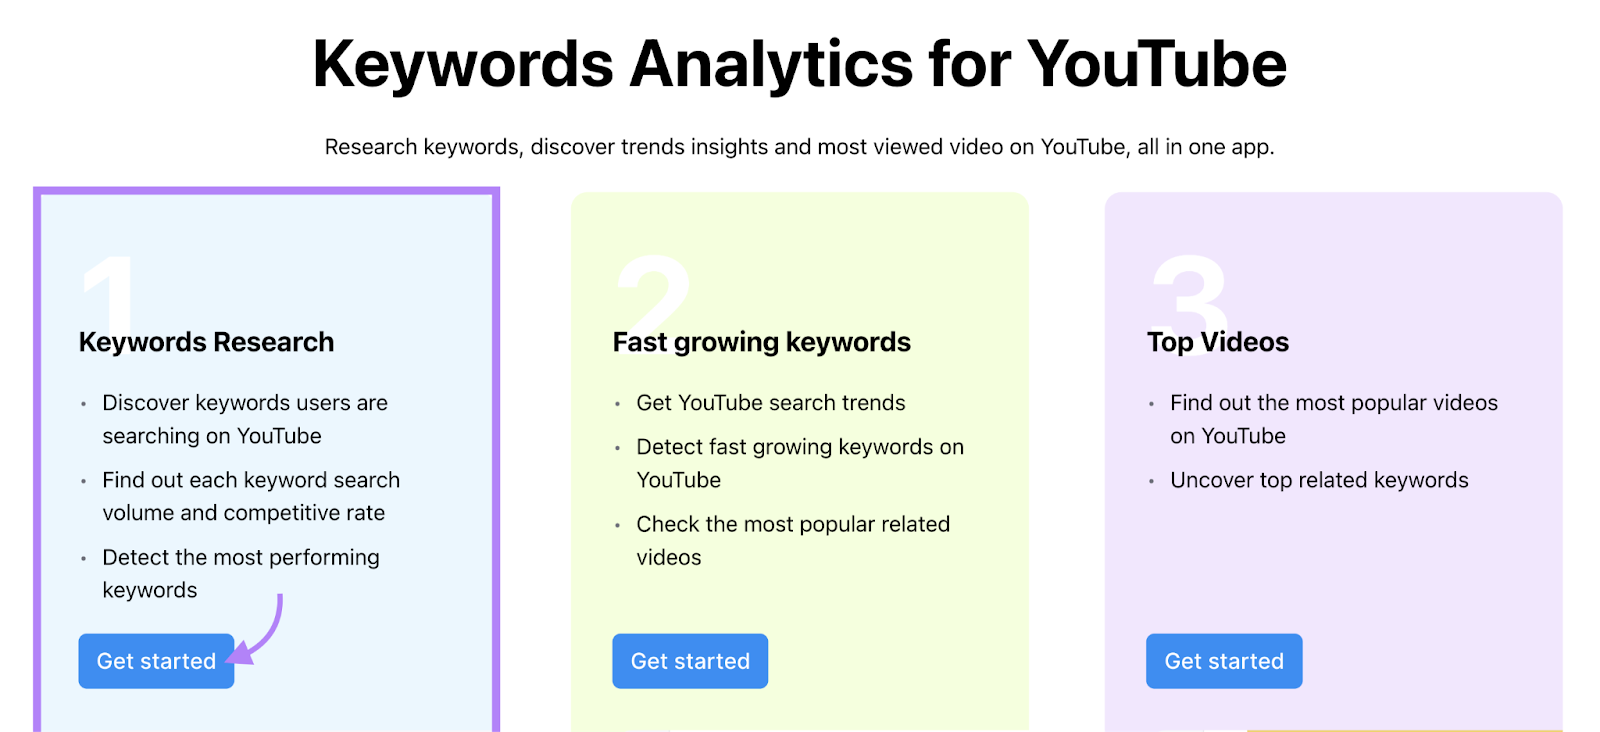 "Keyword Research" option selected under Keyword Analytics for YouTube tool